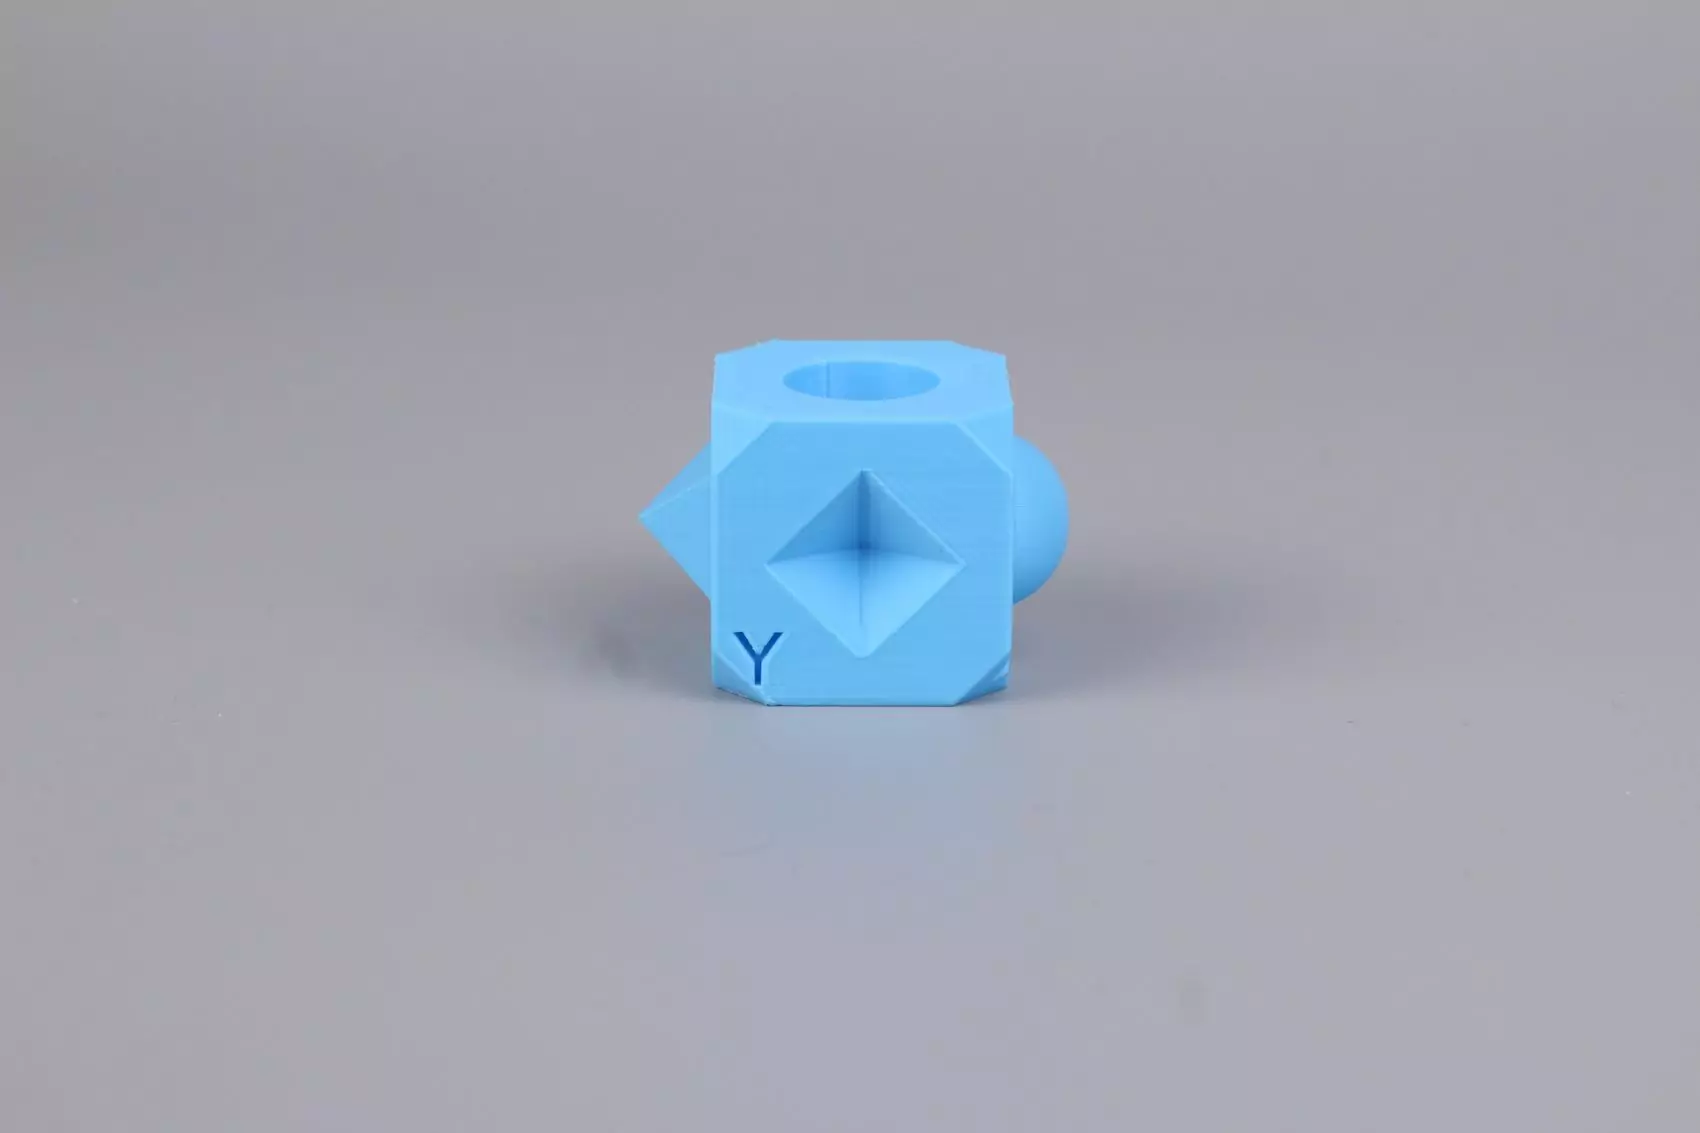 Zaribo Calibration Cube Ender 5 S1 Review1 | Creality Ender-5 S1 Review: Is it a worthy upgrade?